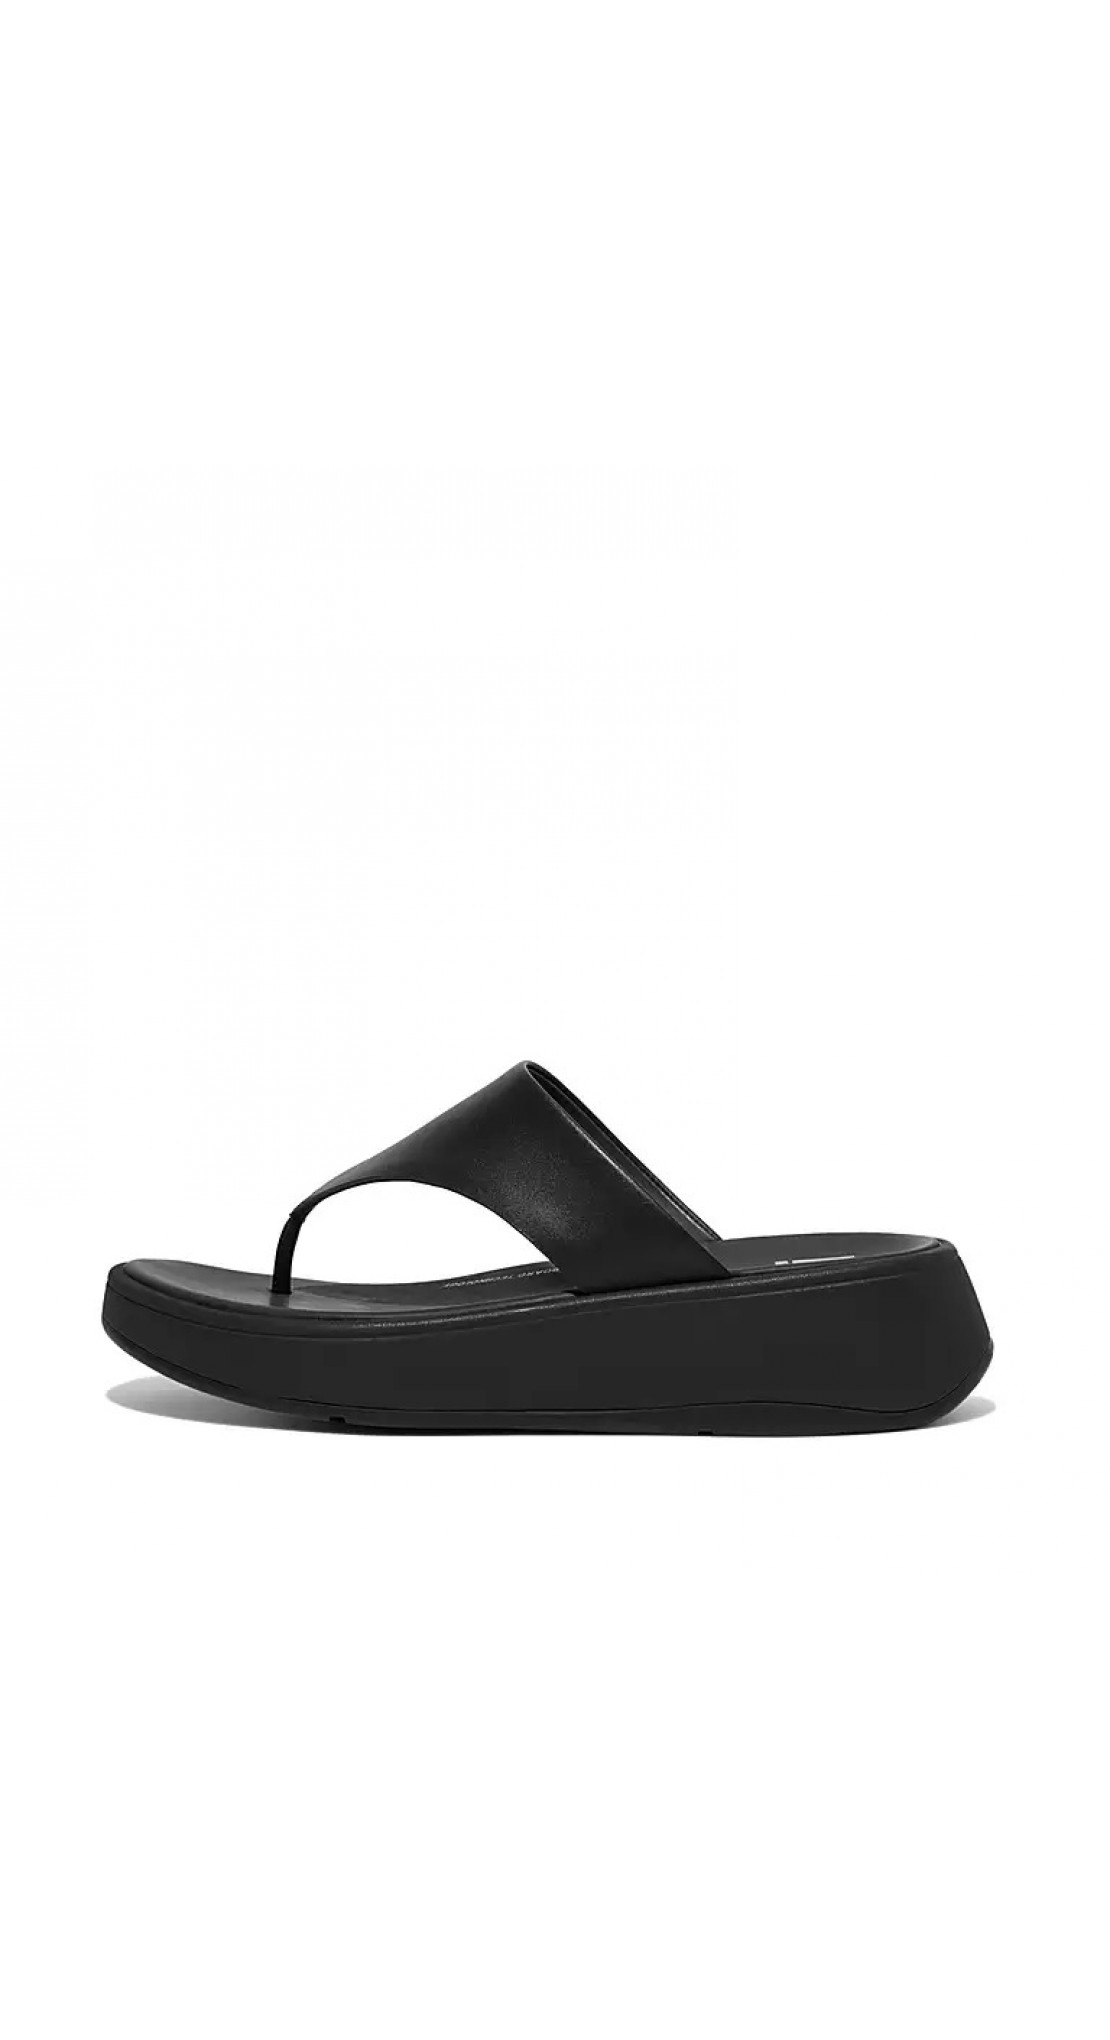 All Stock : Fitflop F-MODE Luxe Leather Flatform Toe-Post ...